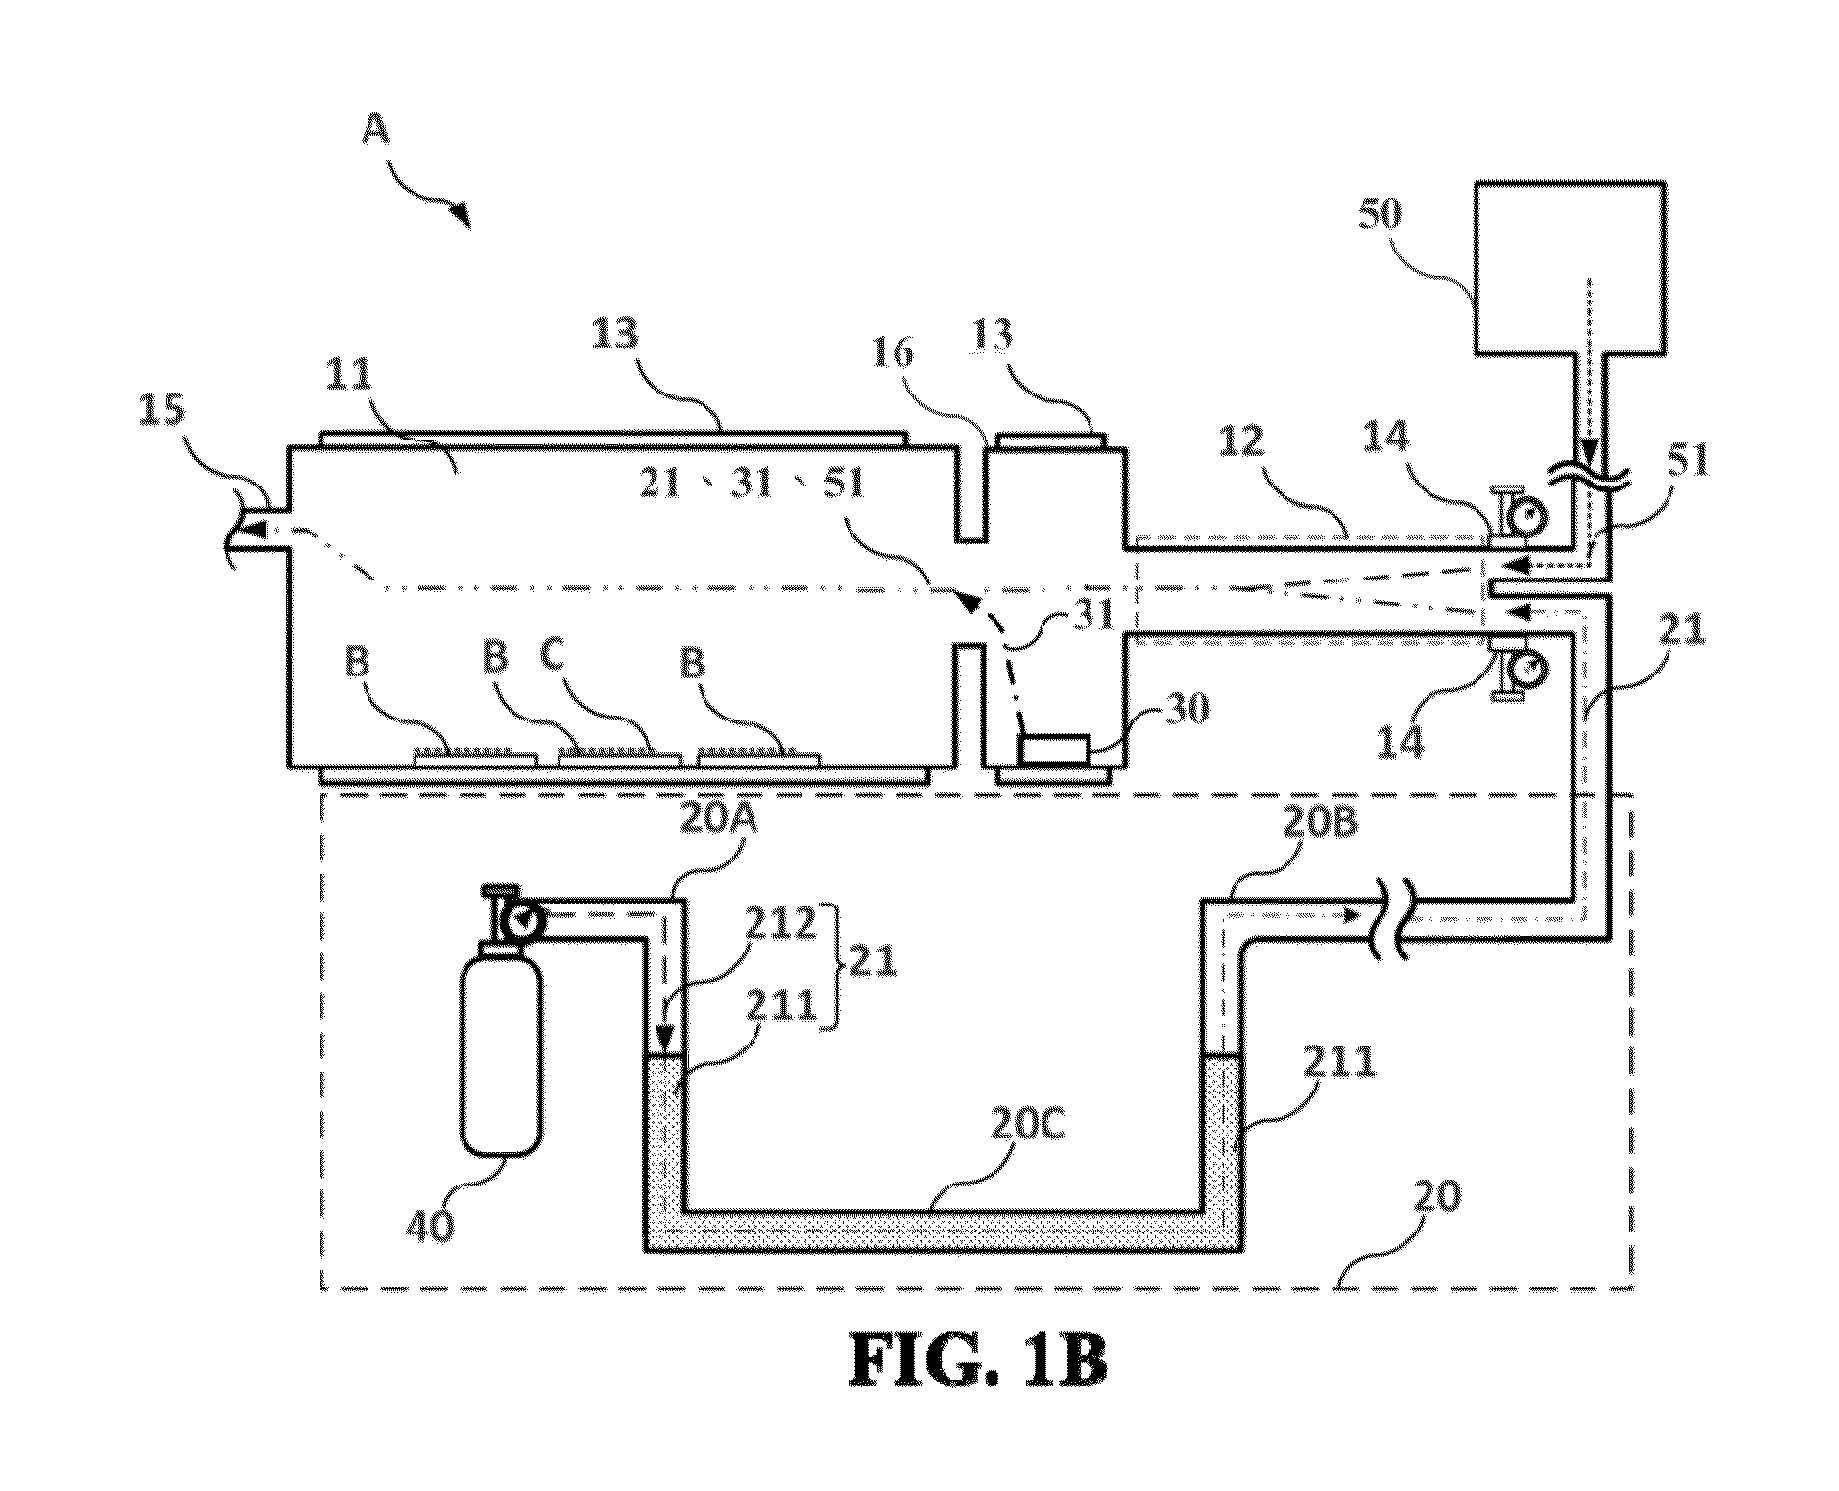 Graphene manufacturing system and the method thereof